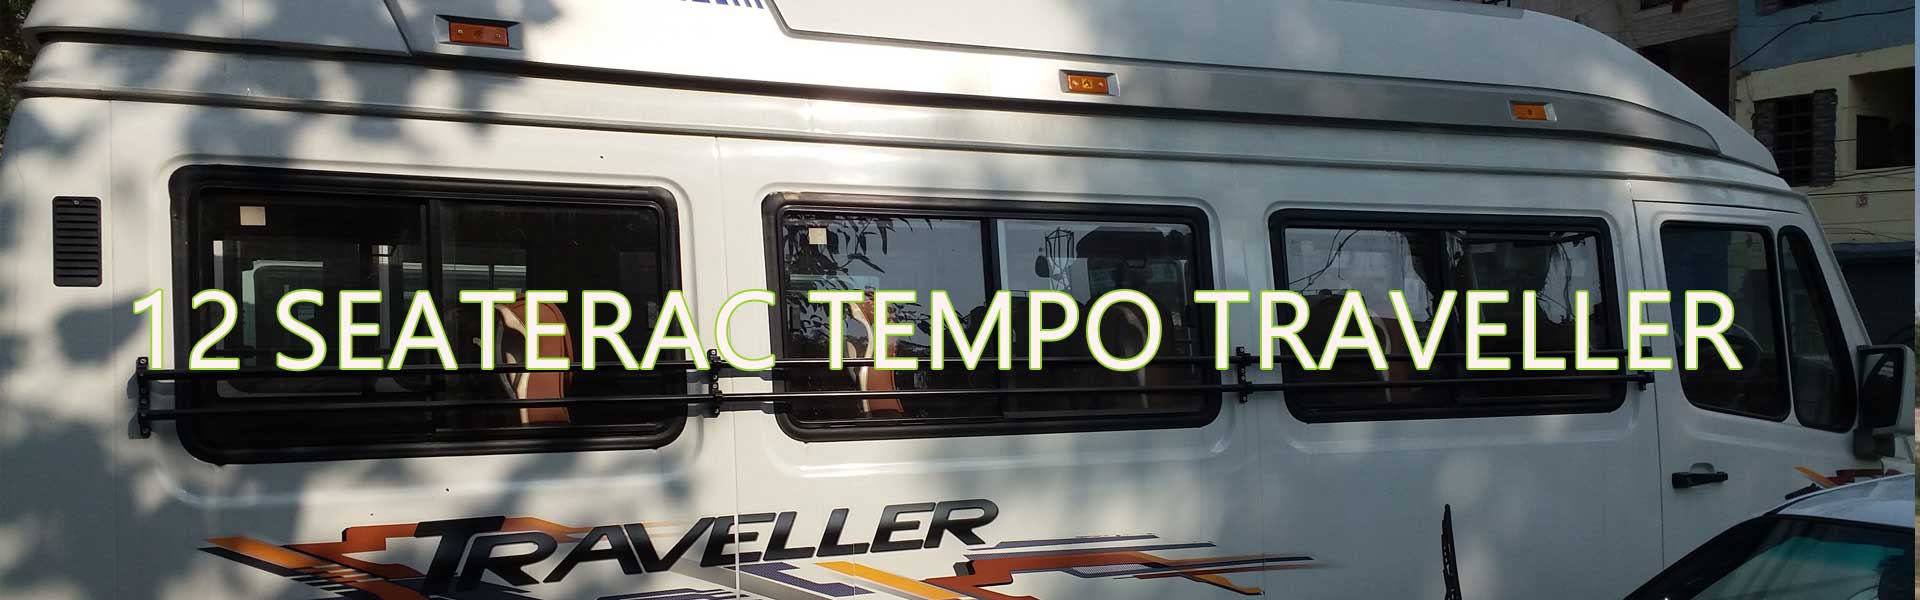 17 seater ac tempo traveller hire in hyderabad